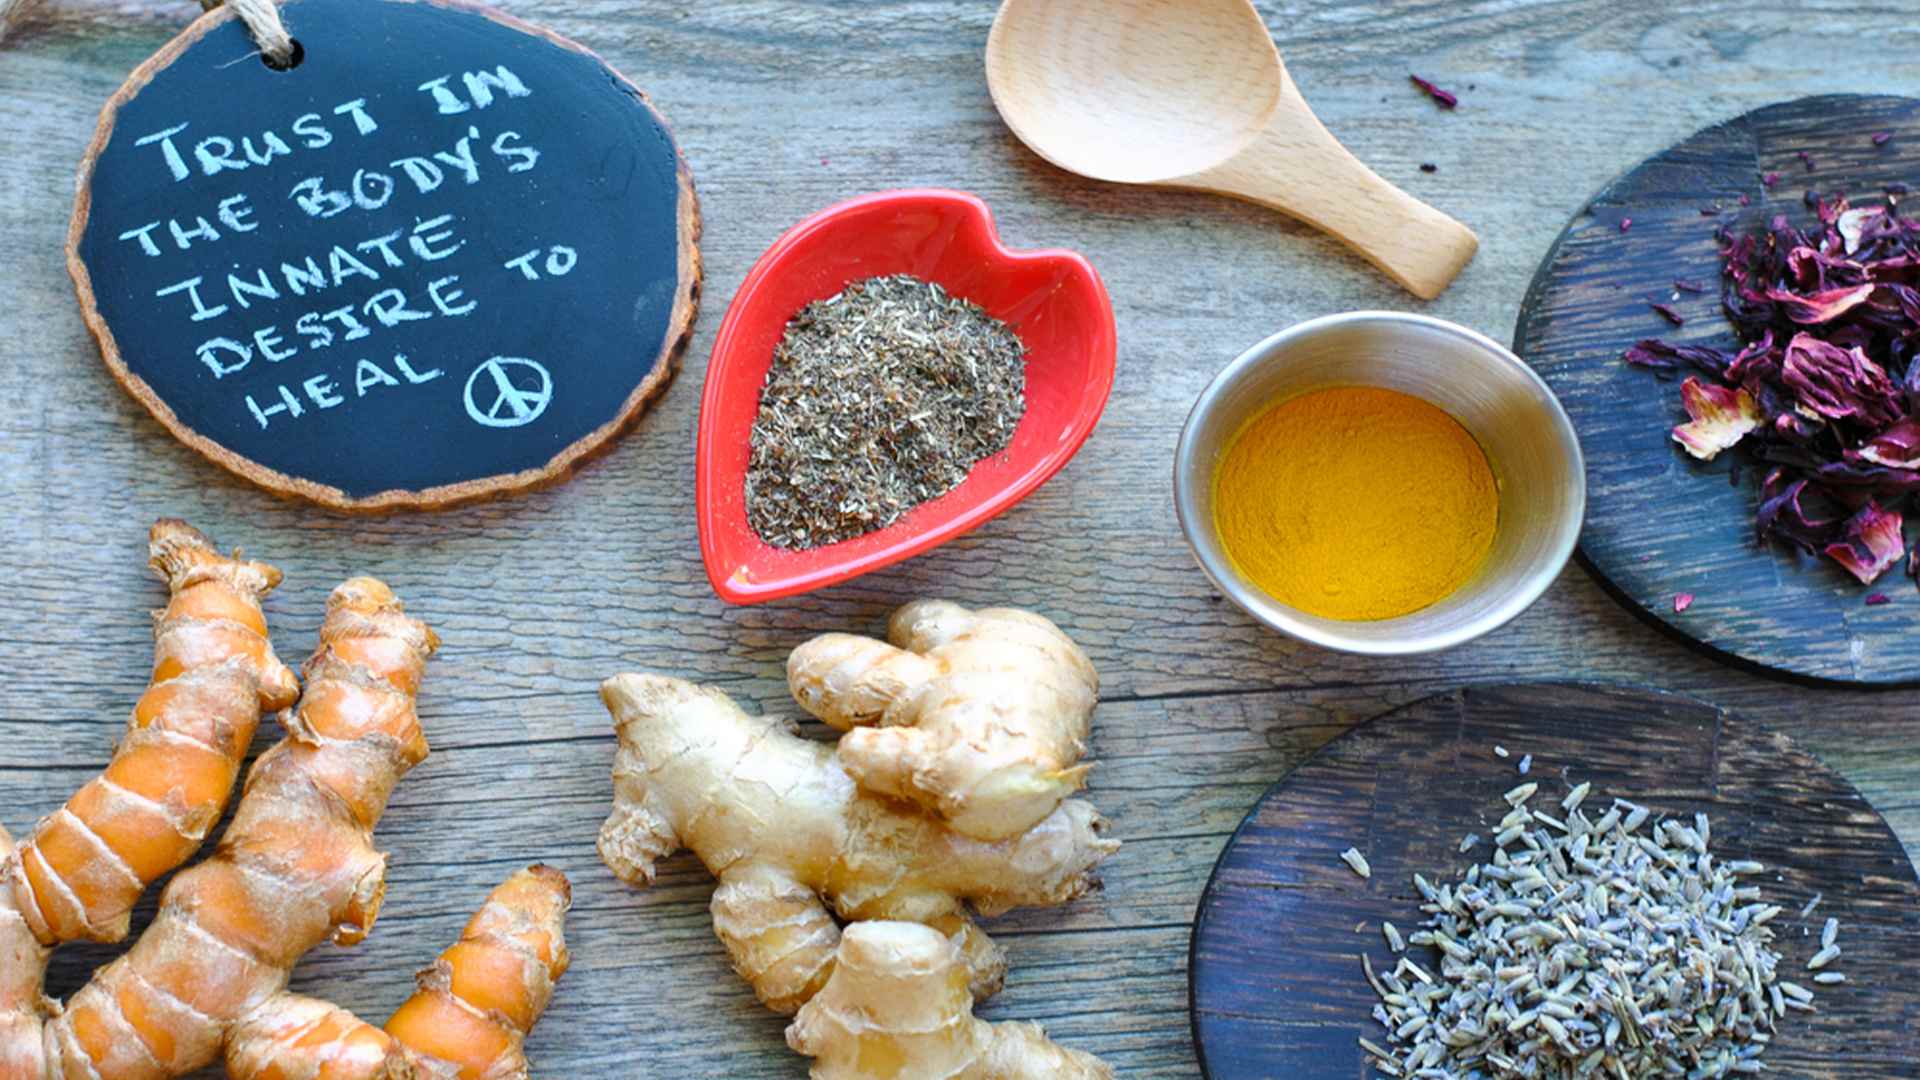 Rustic Spread Of Healing Roots And Herbs For Holistic Health Care Remedies - Holistic Health - Holistic Health Consultations - 6202 N. 9th Ave Suite 1a Pensacola, FL 32504 - (850) 918-8424